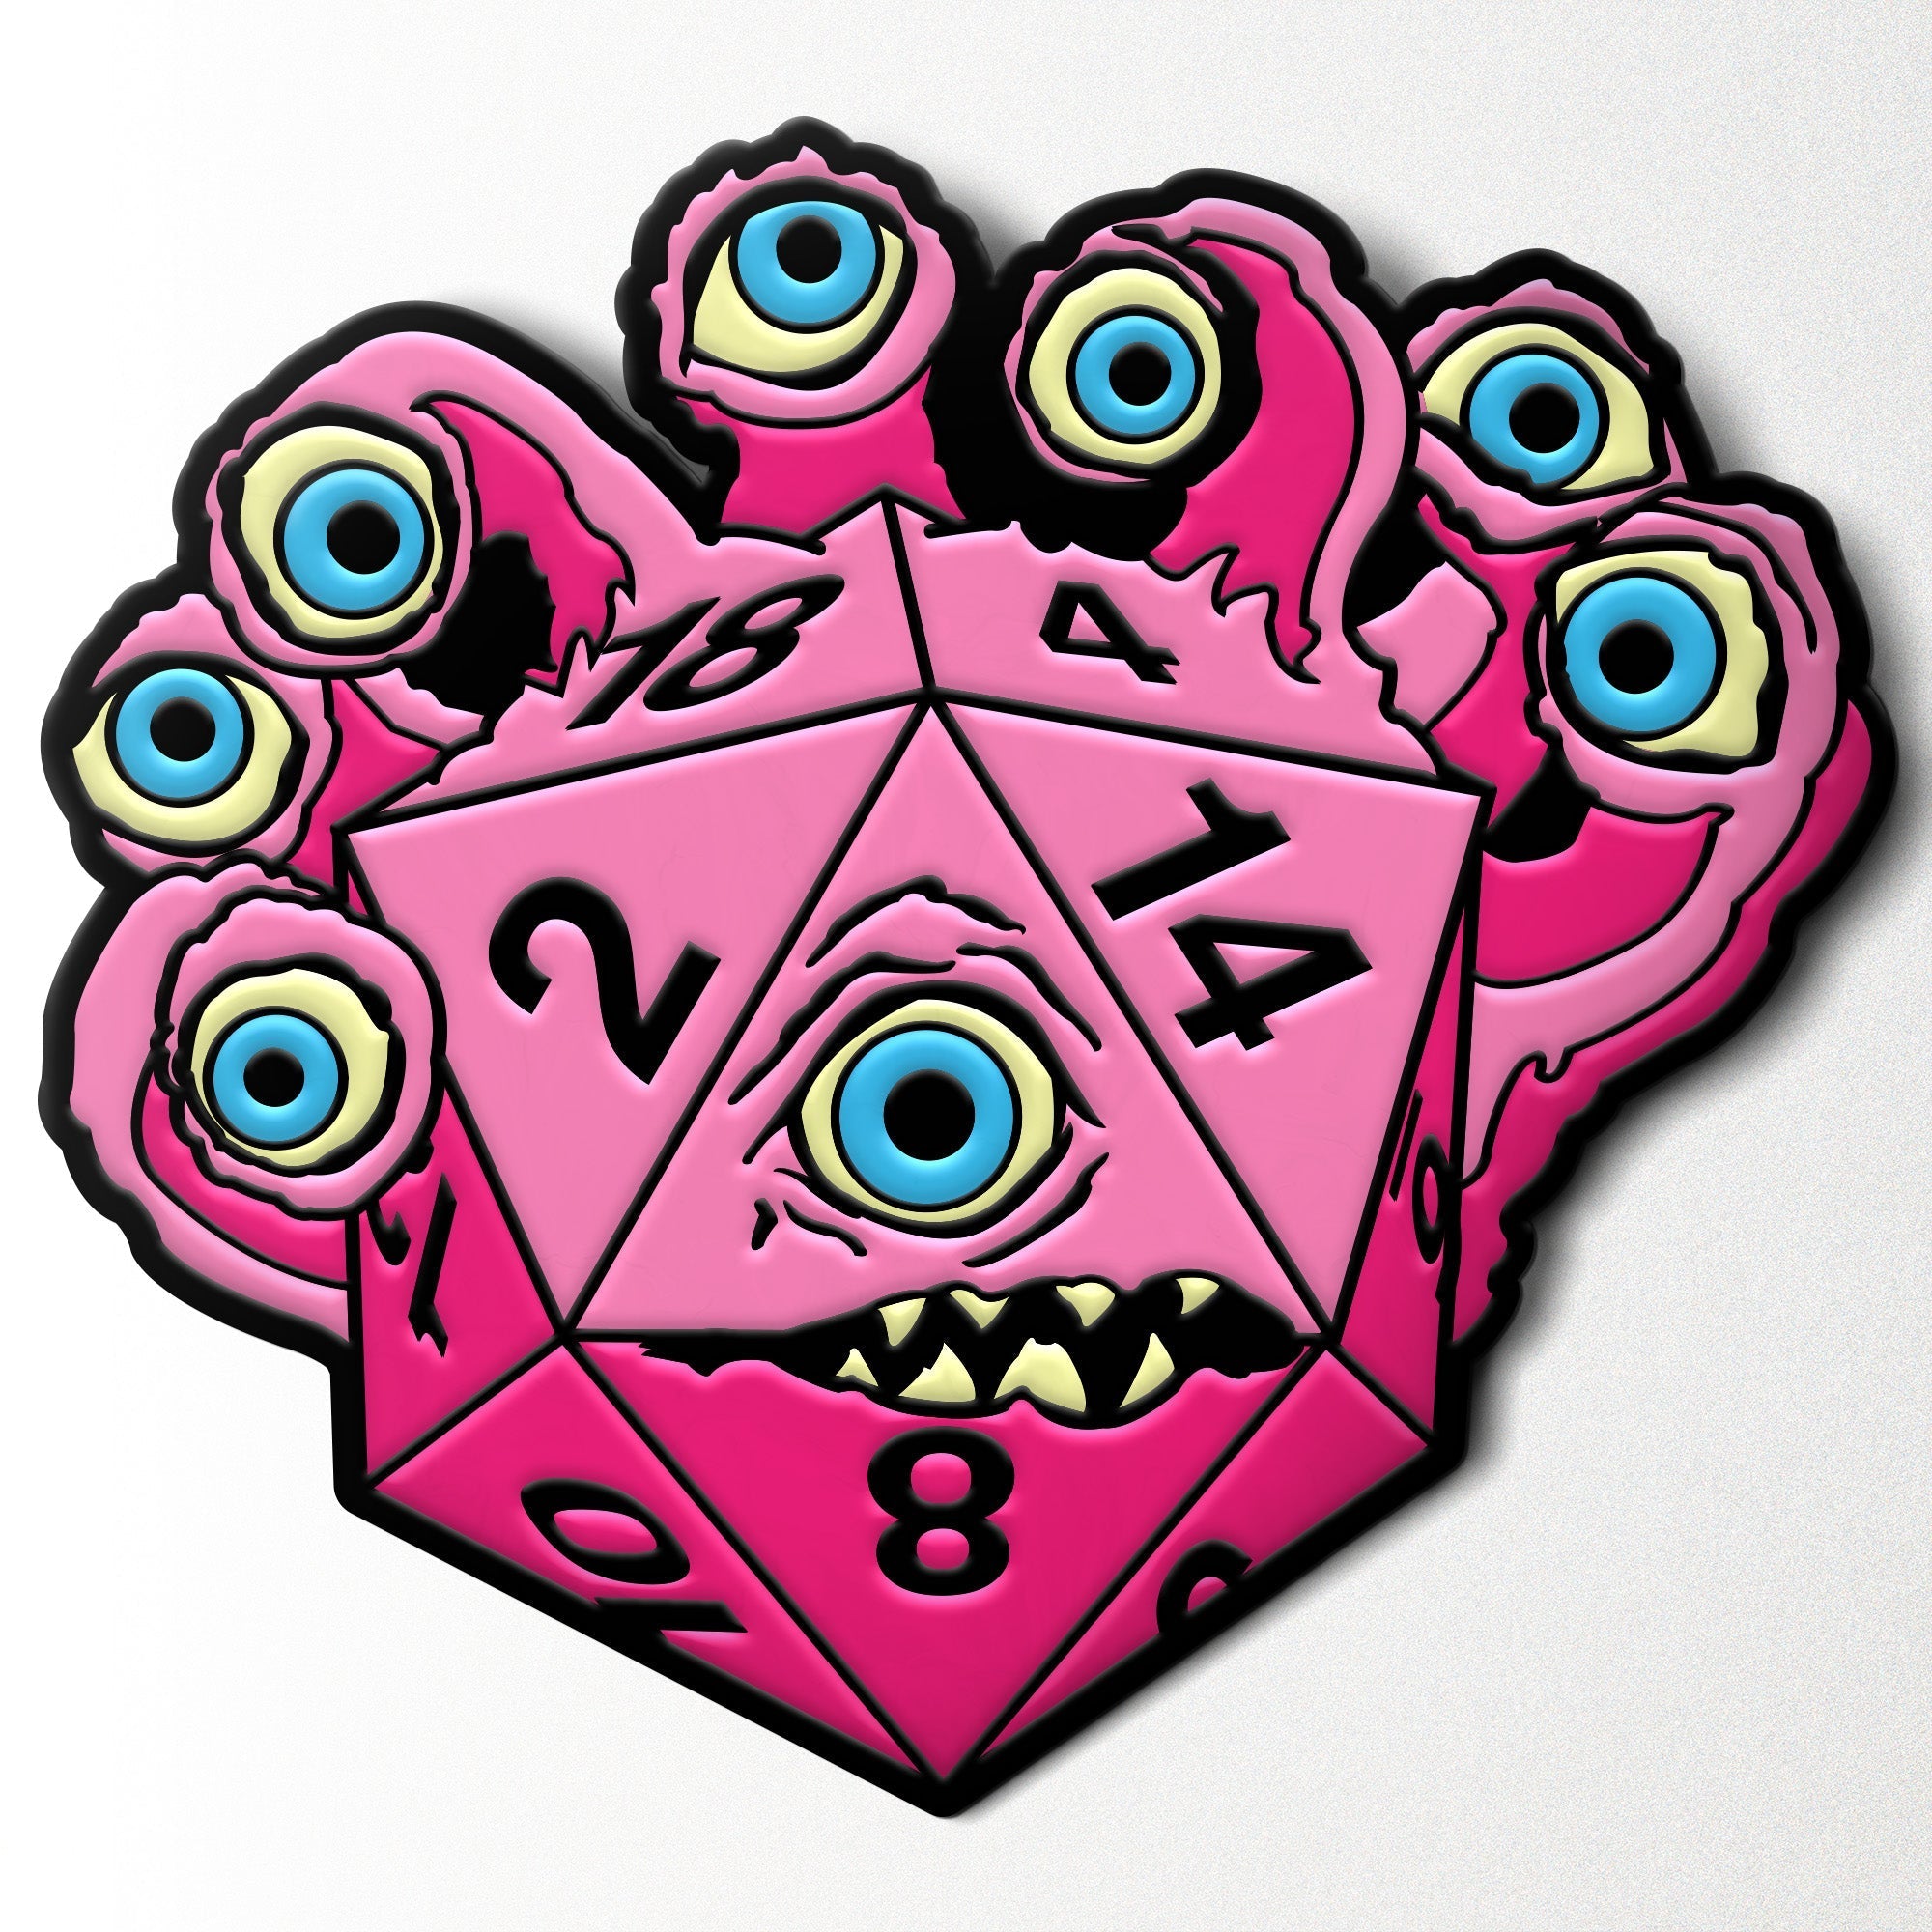 DieHolder / Eye Tyrant - Hard Enamel Adventure Dice Pin Metal by Norse Foundry - NOR 03601_Parent